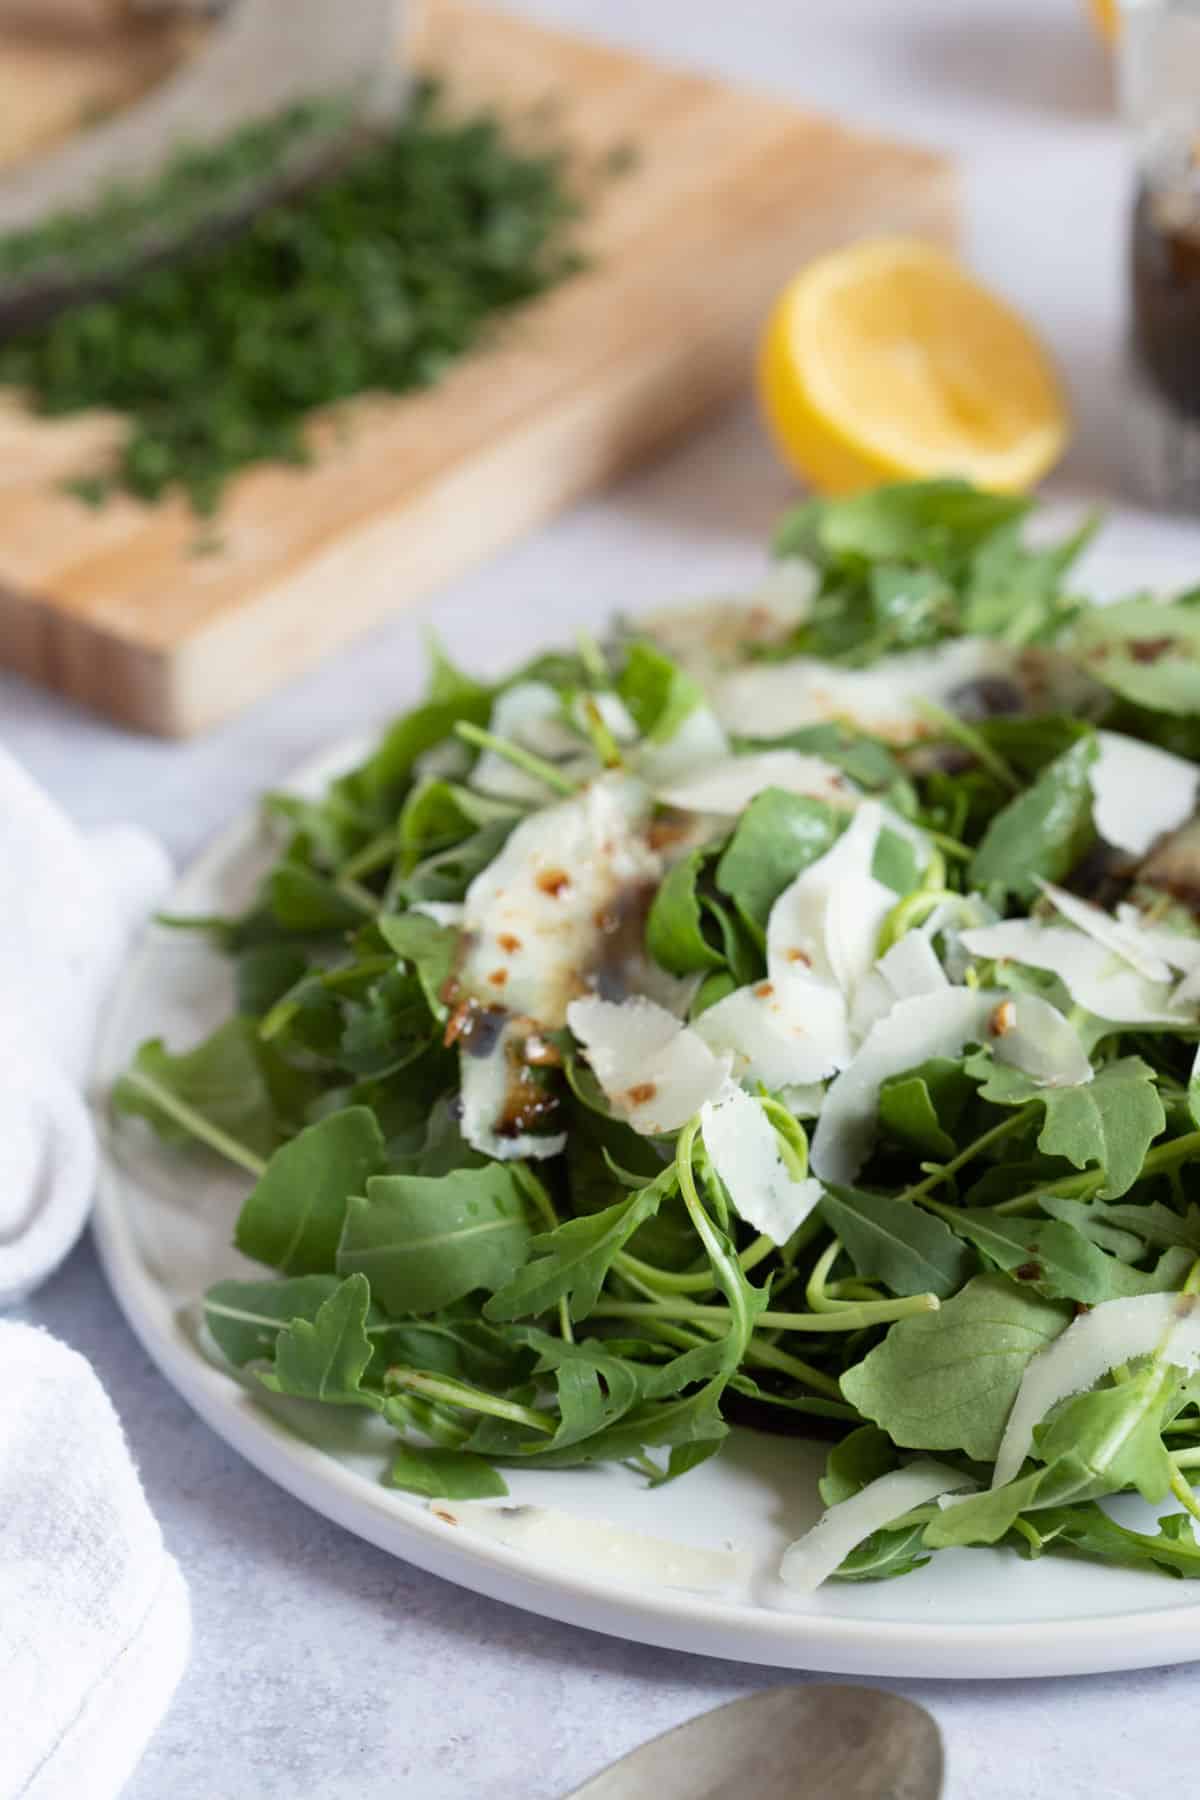 Green salad with Parmesan shavings on a white plate.